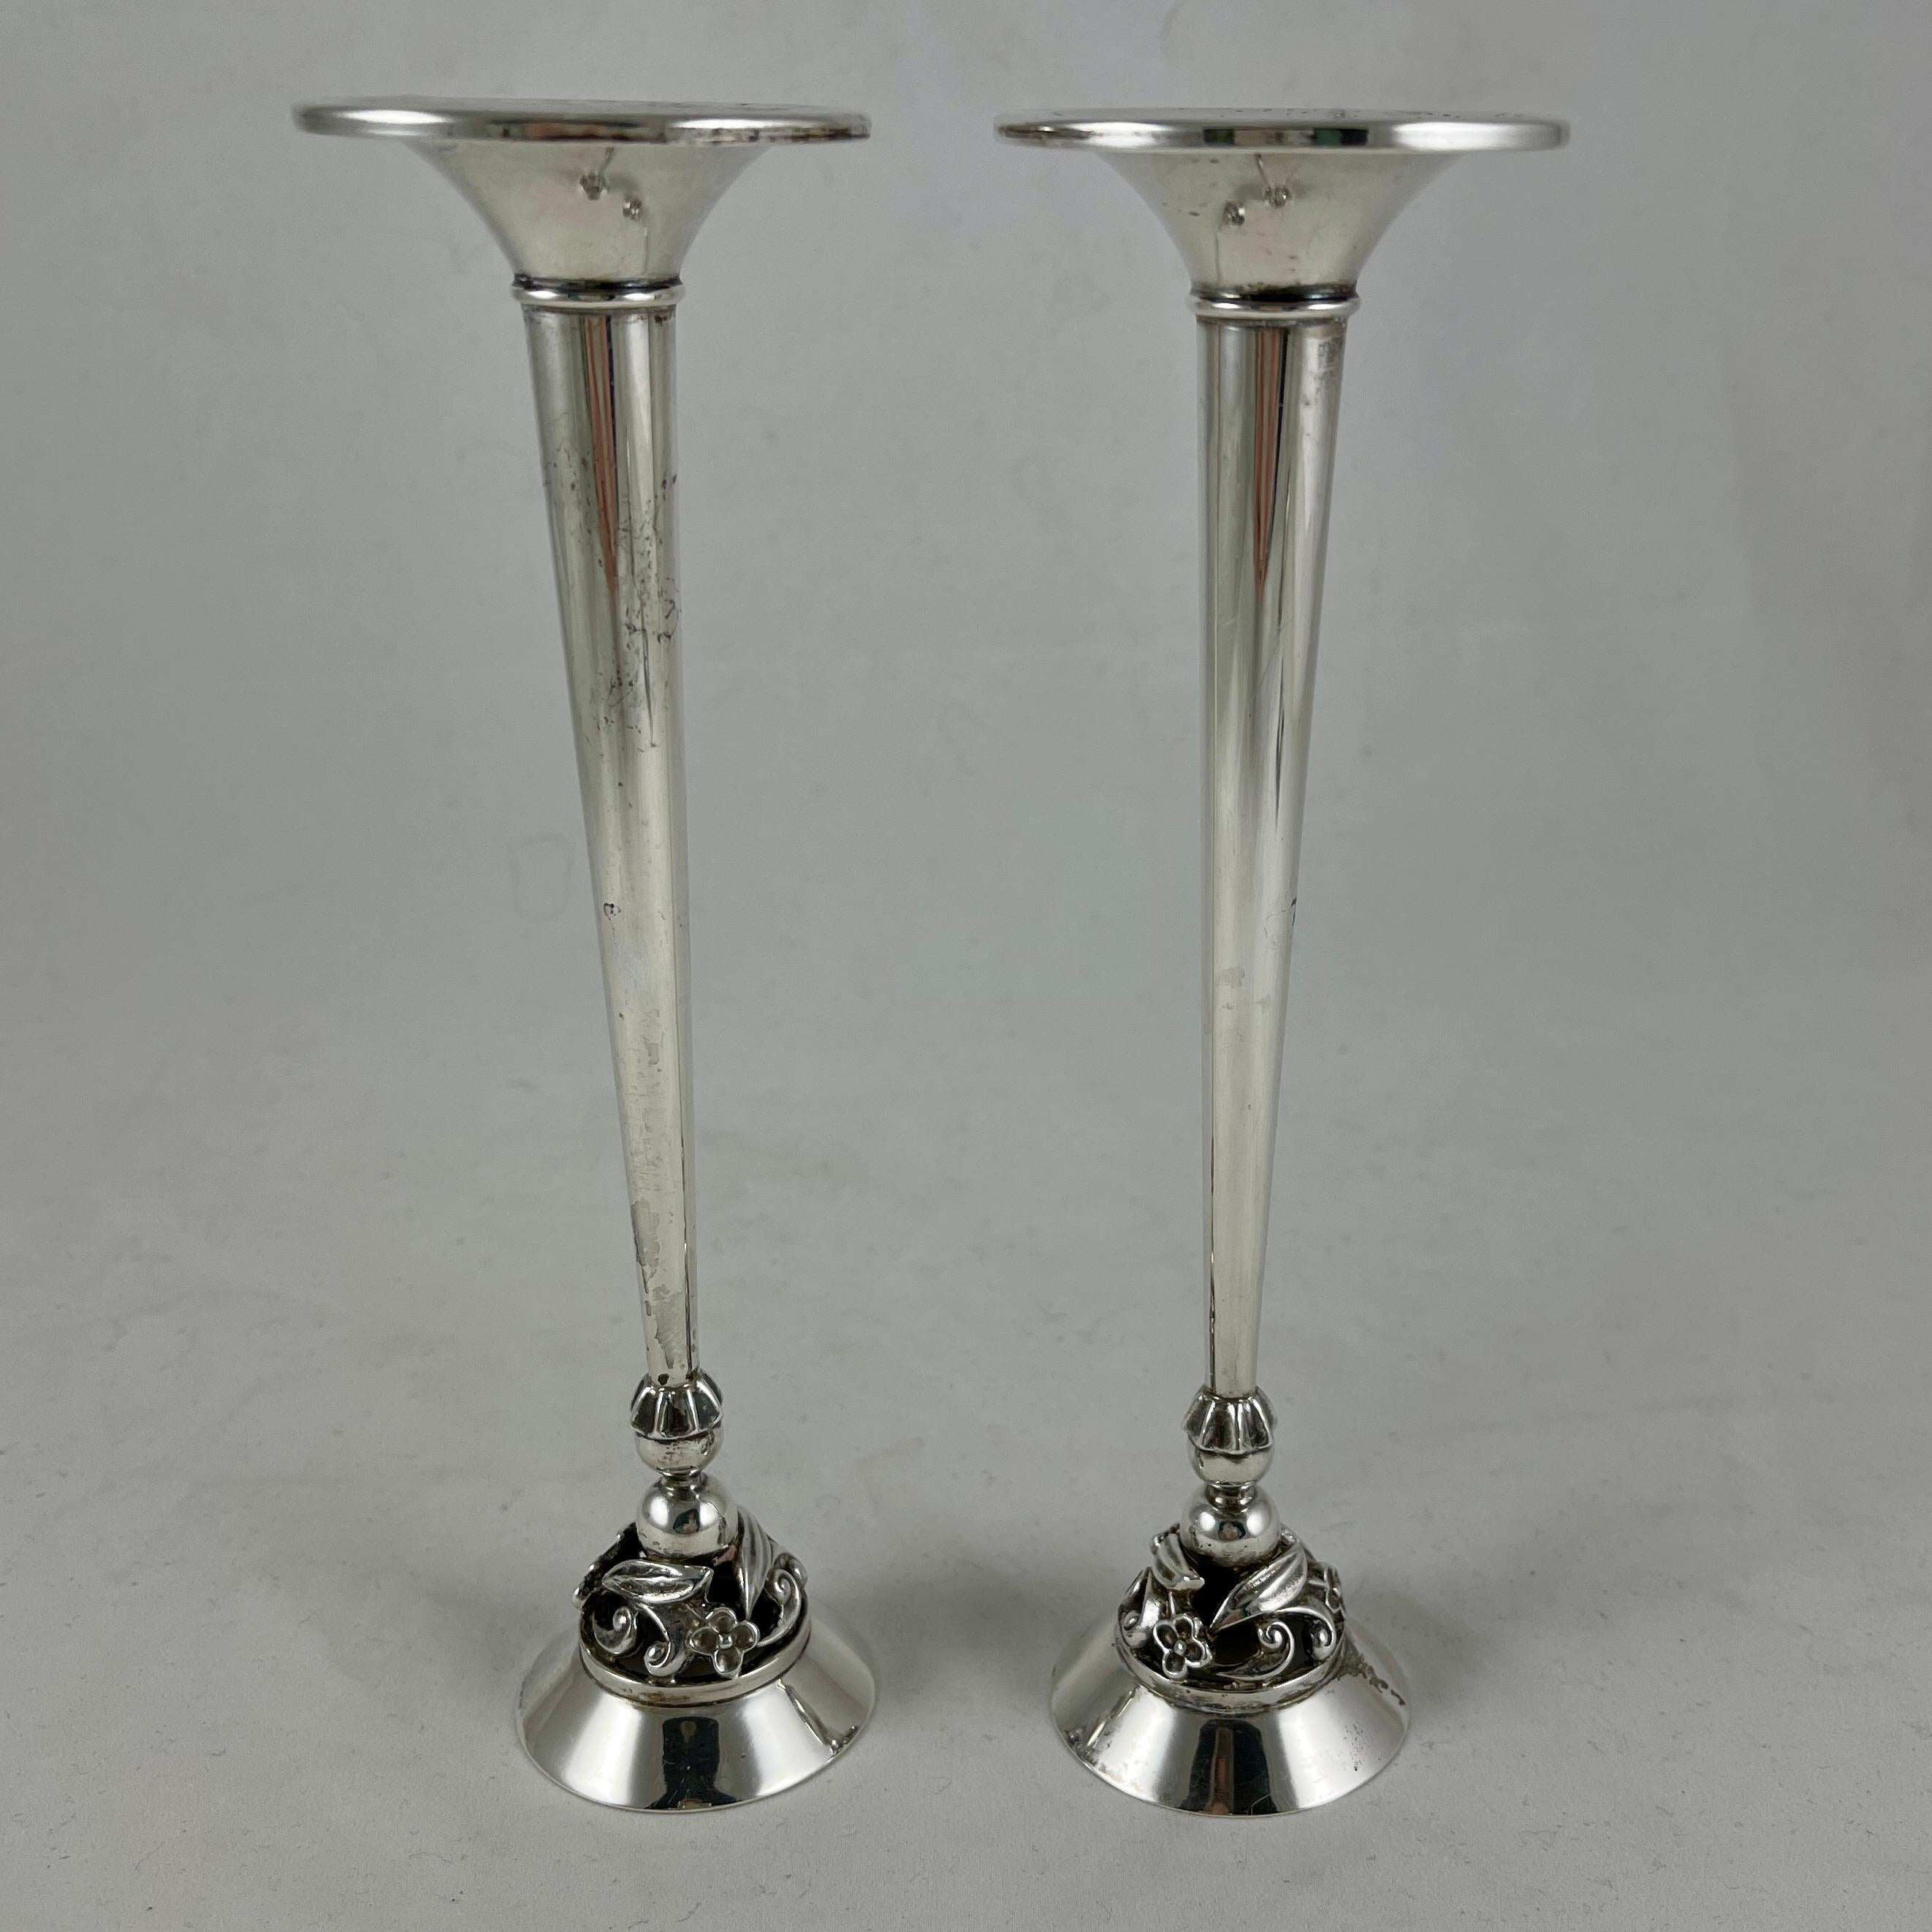 A pair of mid-century sterling silver modernist candlesticks showing the mark for Alphonse La Paglia, circa 1943 – 1950.

Alphonse La Paglia (1907-1953) was born in Sicily and studied silversmithing under Georg Jensen in Denmark. He was a designer